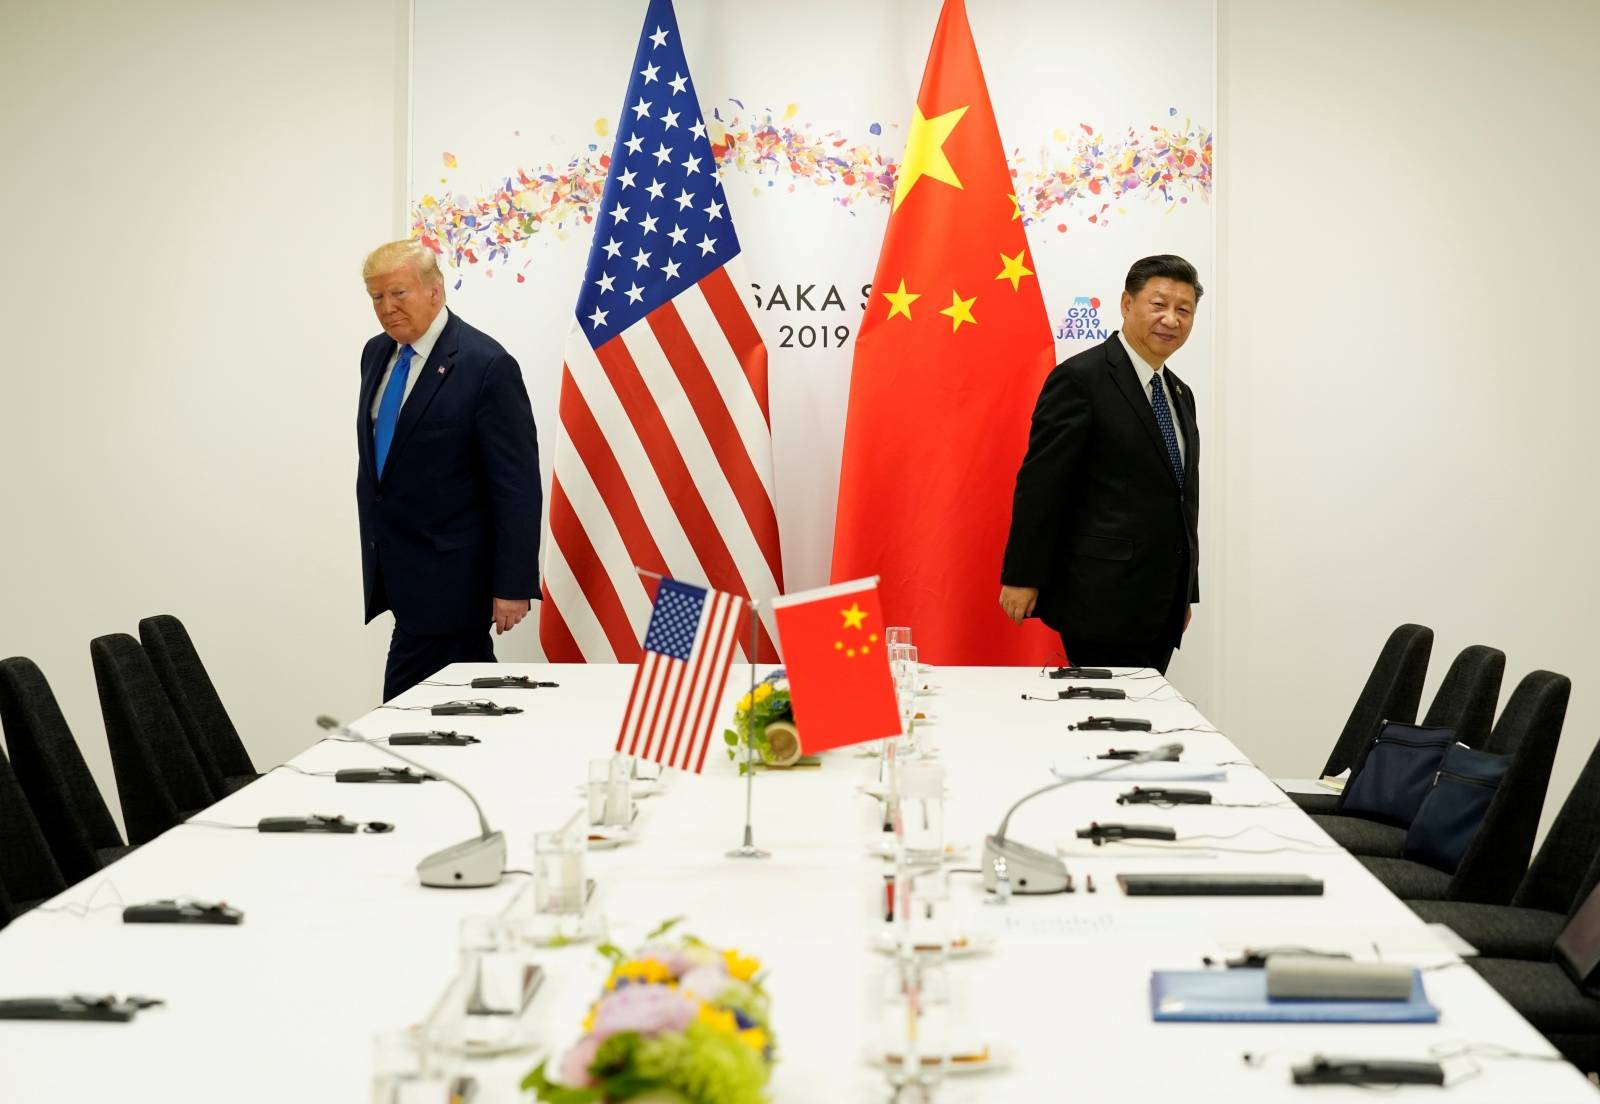 FILE PHOTO: U.S. President Donald Trump attends a bilateral meeting with China's President Xi Jinping during the 2019 G20 leaders summit in Osaka, Japan